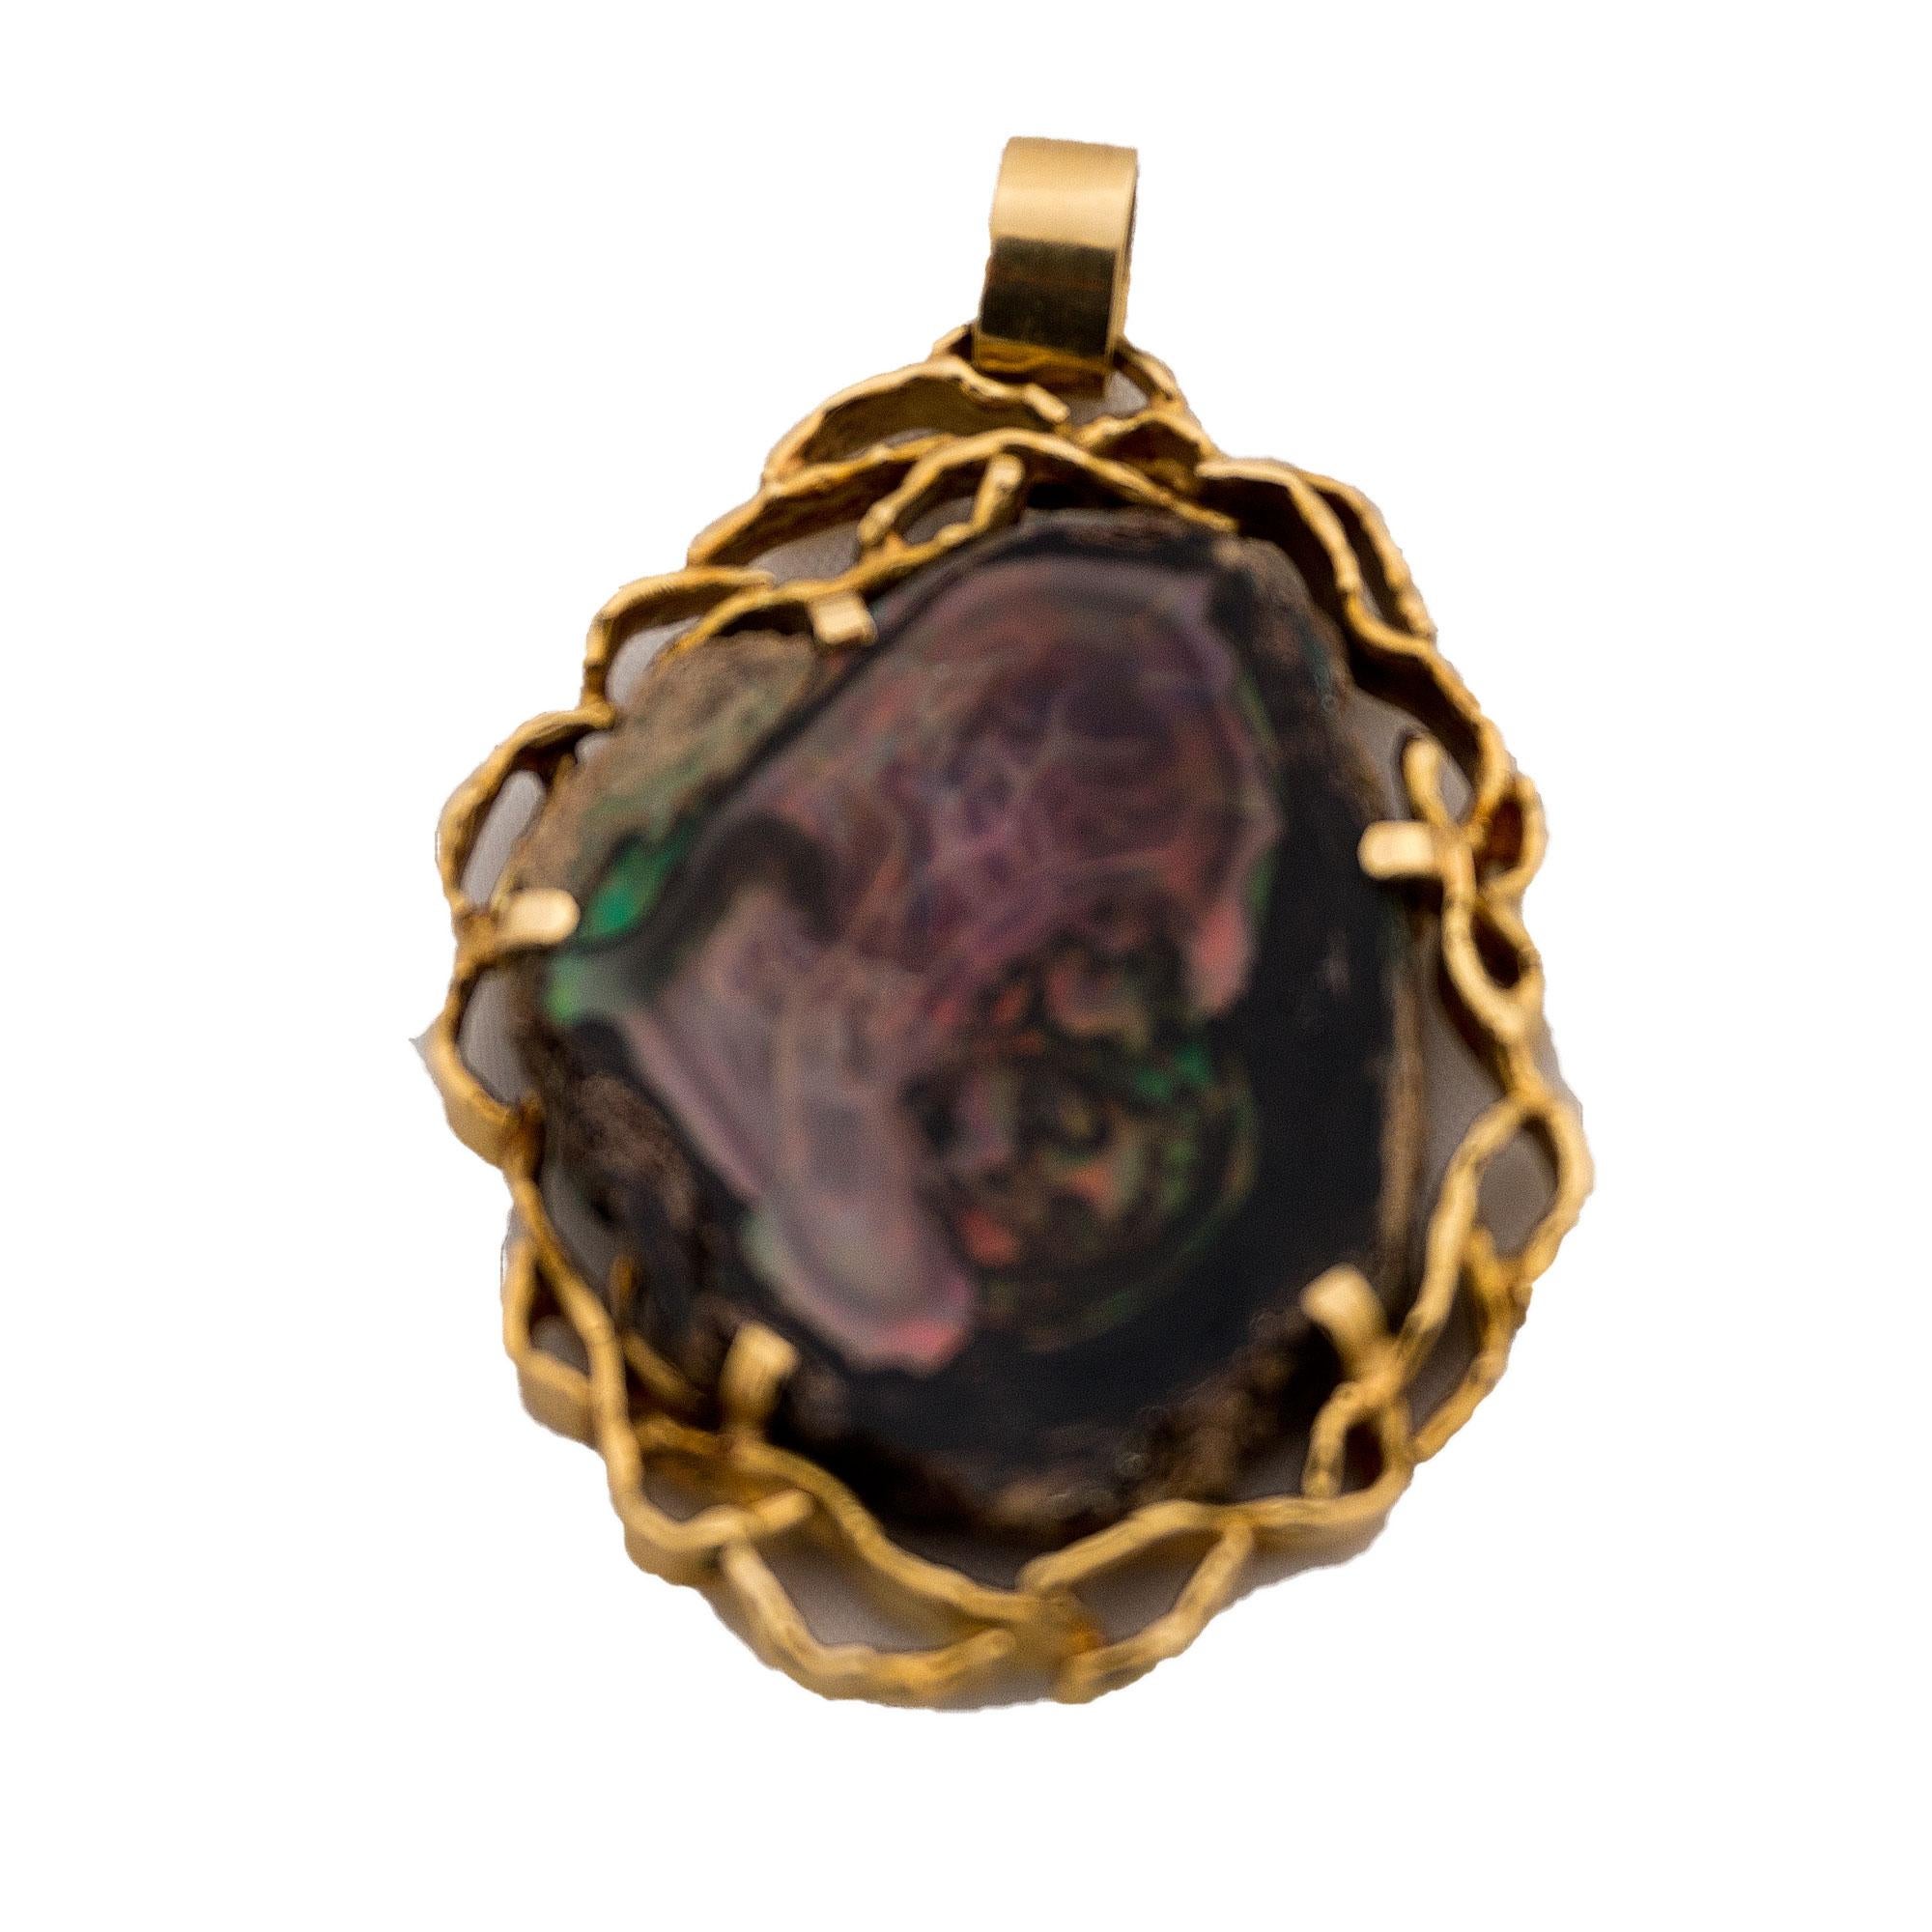 Opal in its natural matrix in 750 yellow gold
Pendant in 750 yellow gold with 1 opal disc with matrix.
The playful setting is handmade and adapted to the irregular shape of the opal. The opal has the dimensions of about 34x 27 mm. The stone has an